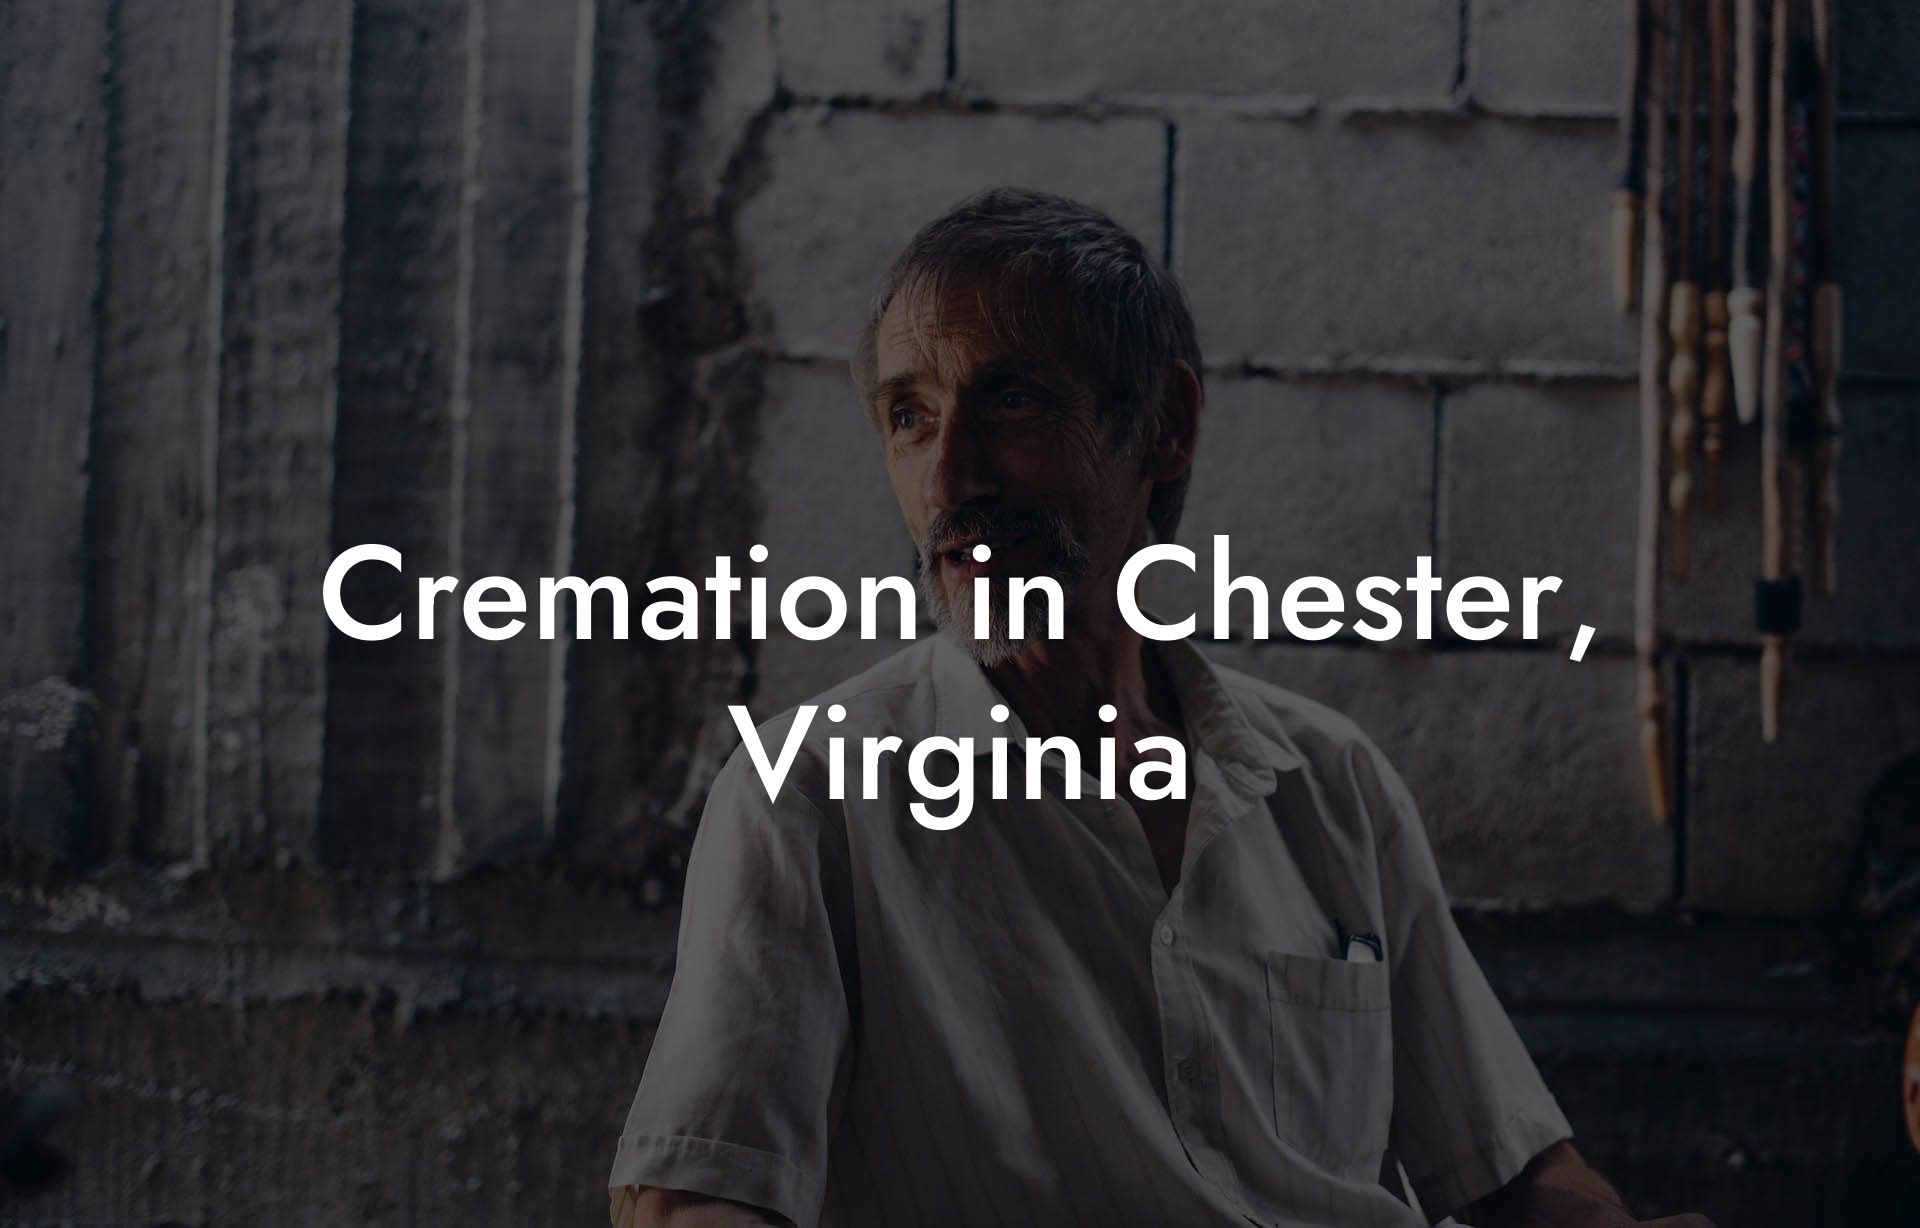 Cremation in Chester, Virginia